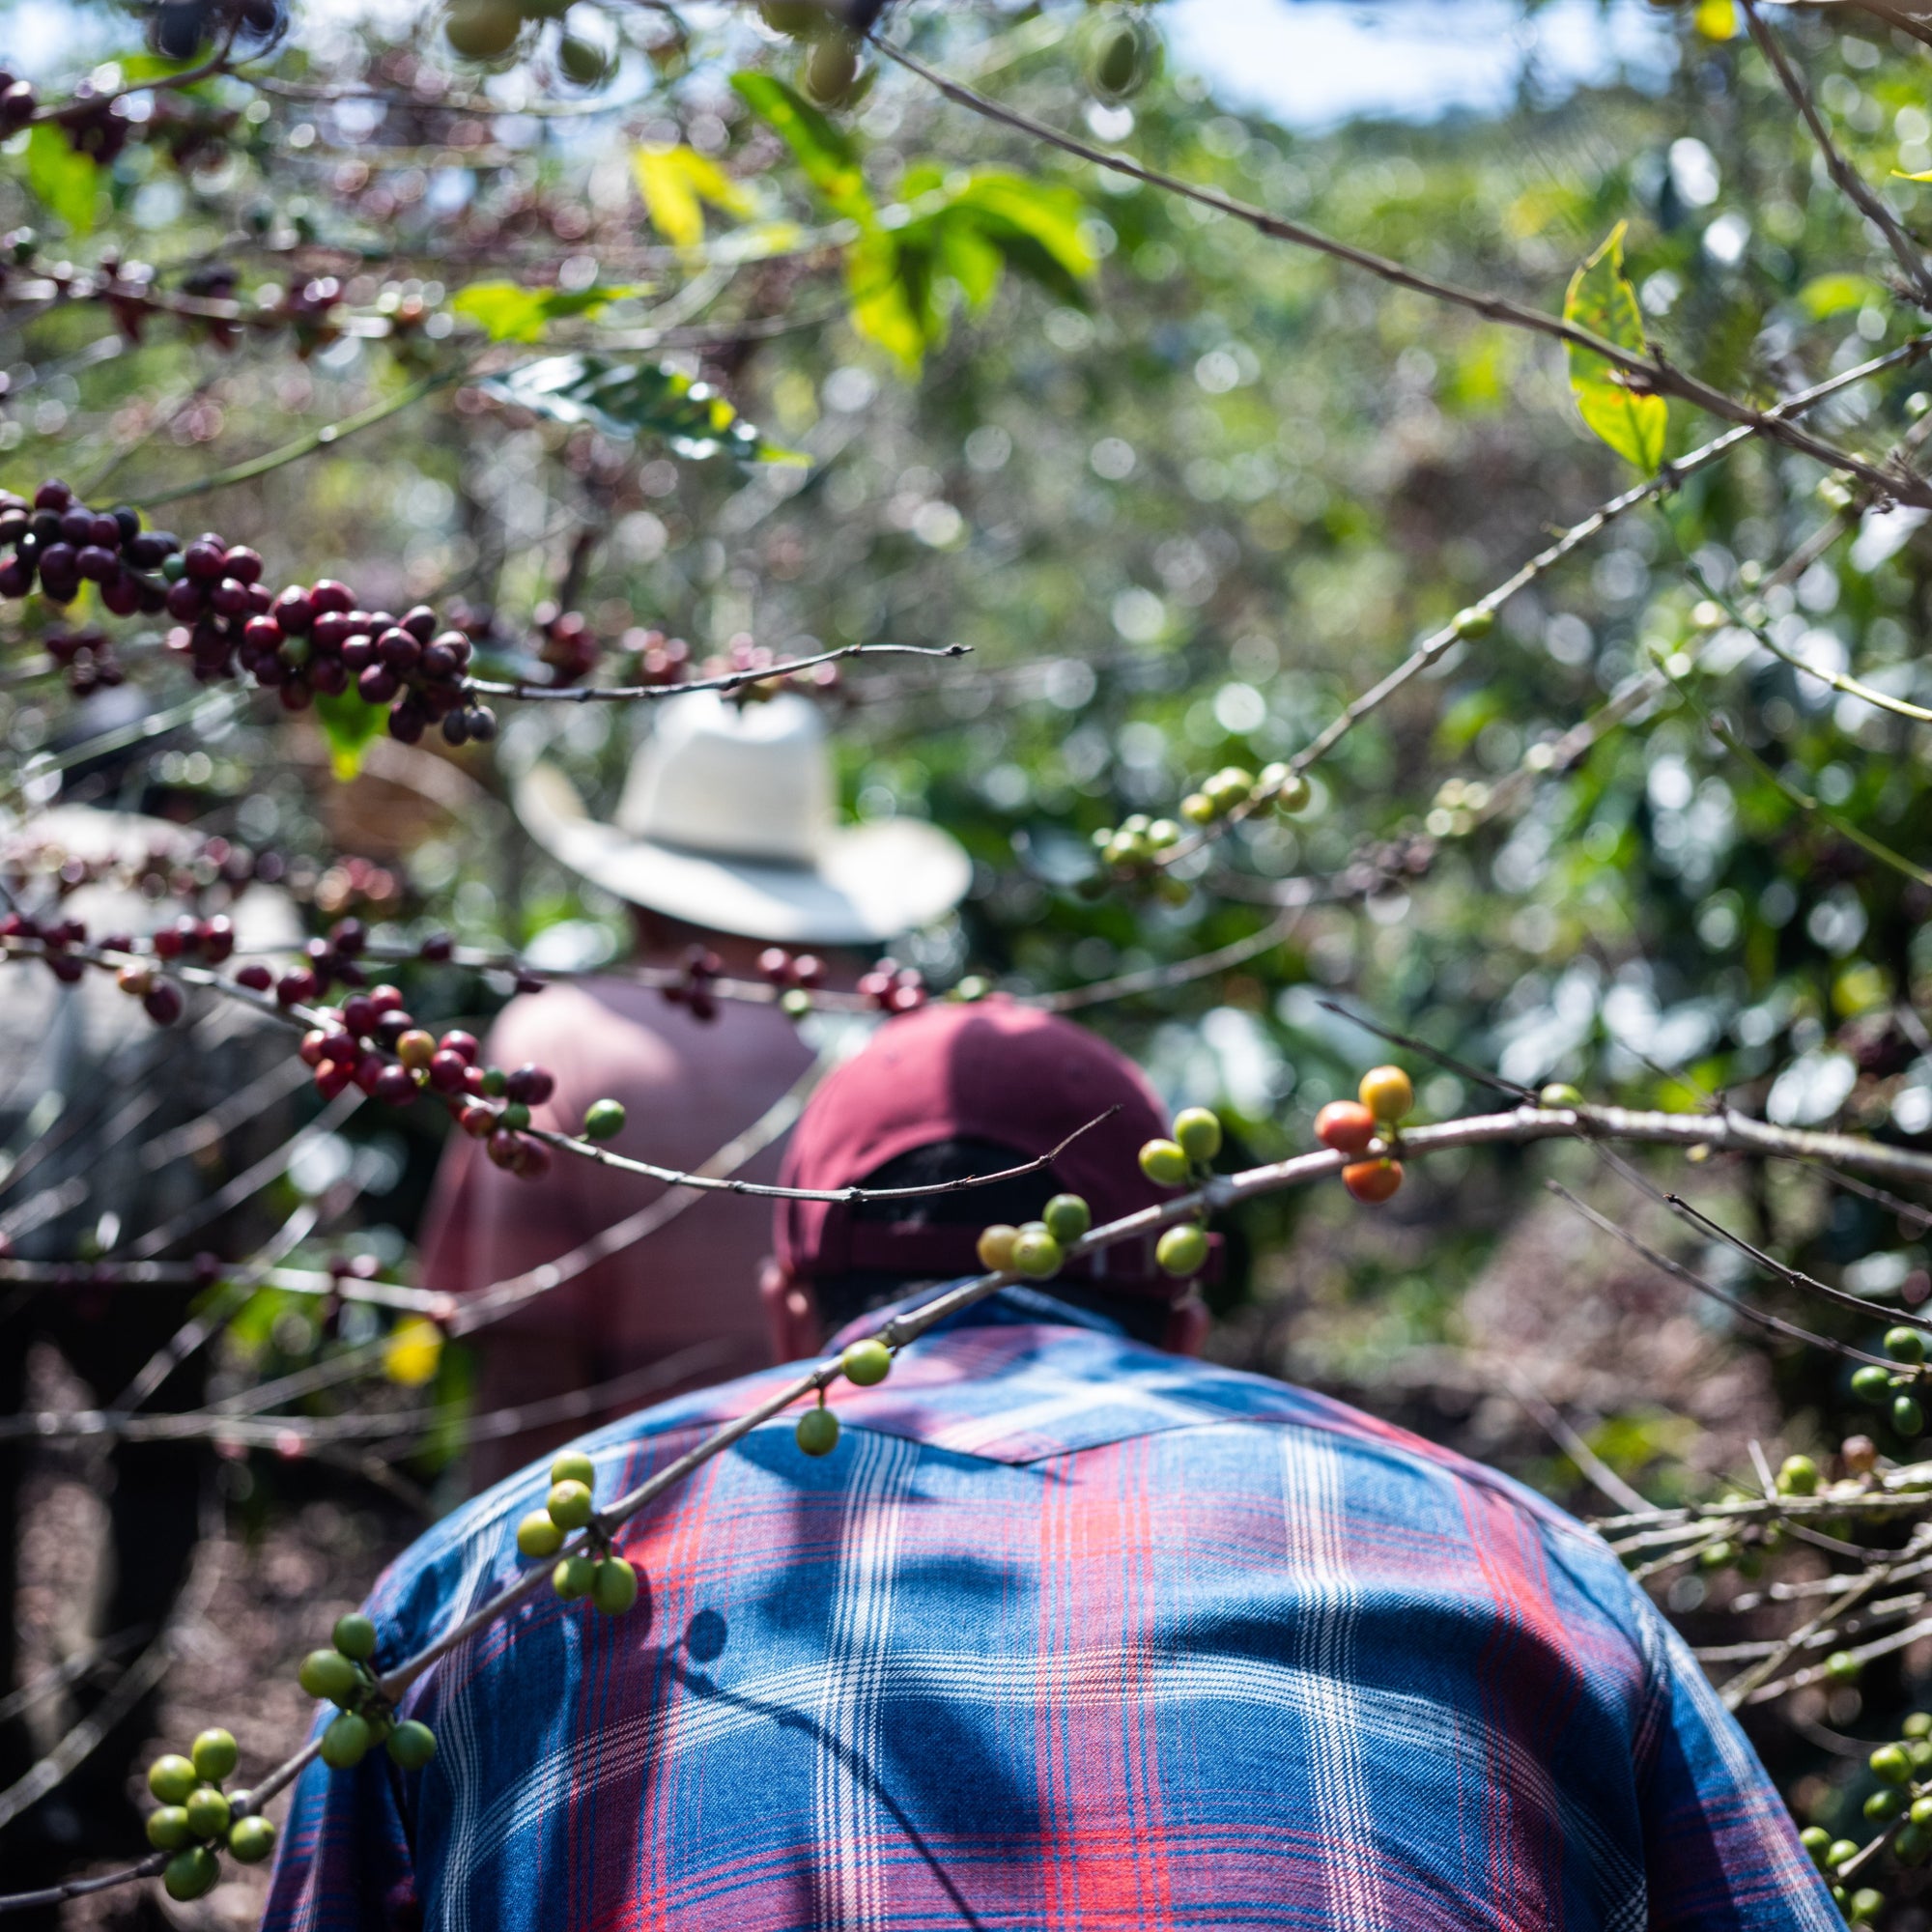 Two coffee farmers walking under branches of coffee plants